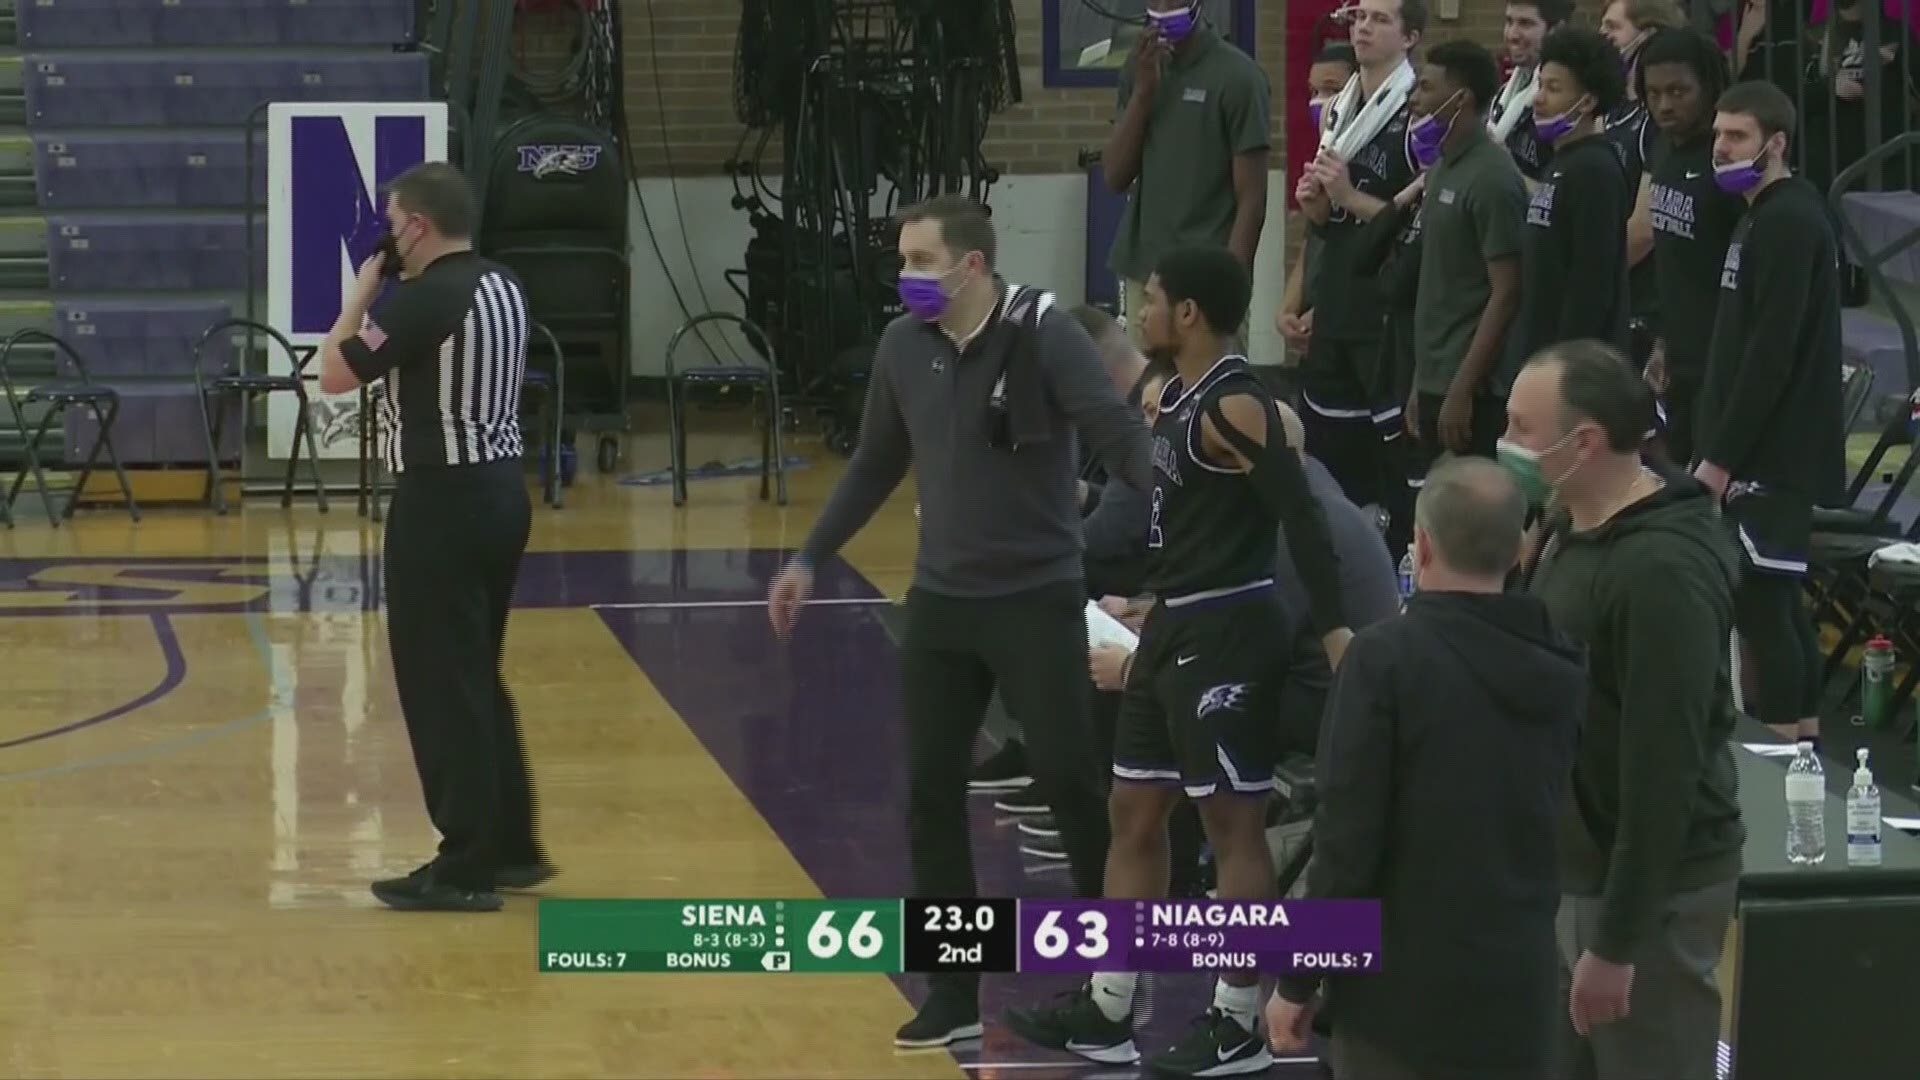 Niagara basketball falls to Siena in back-to-back match, 68-66